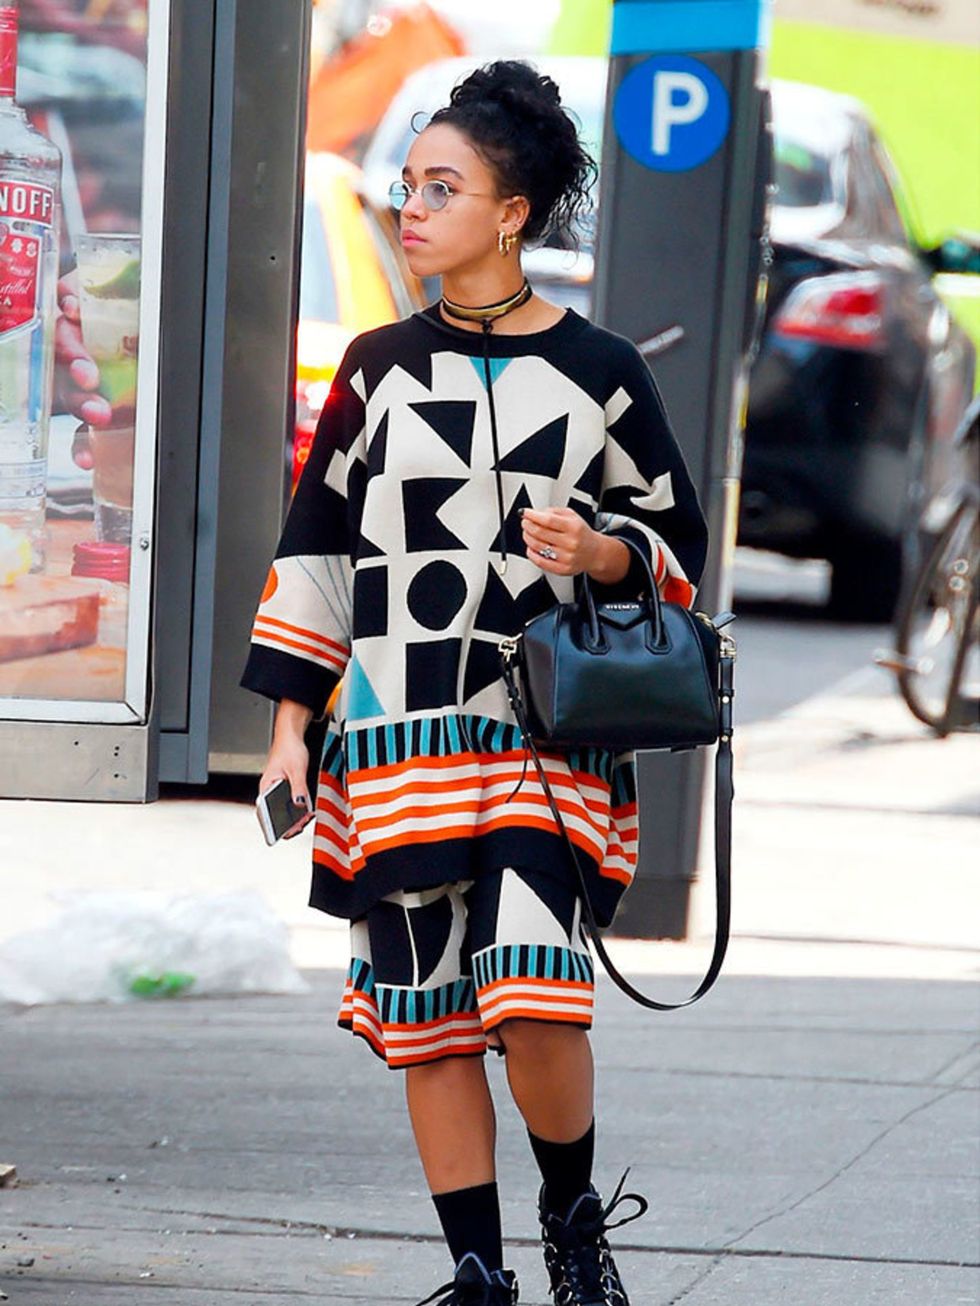 FKA Twigs out and about in New York, May 2015.